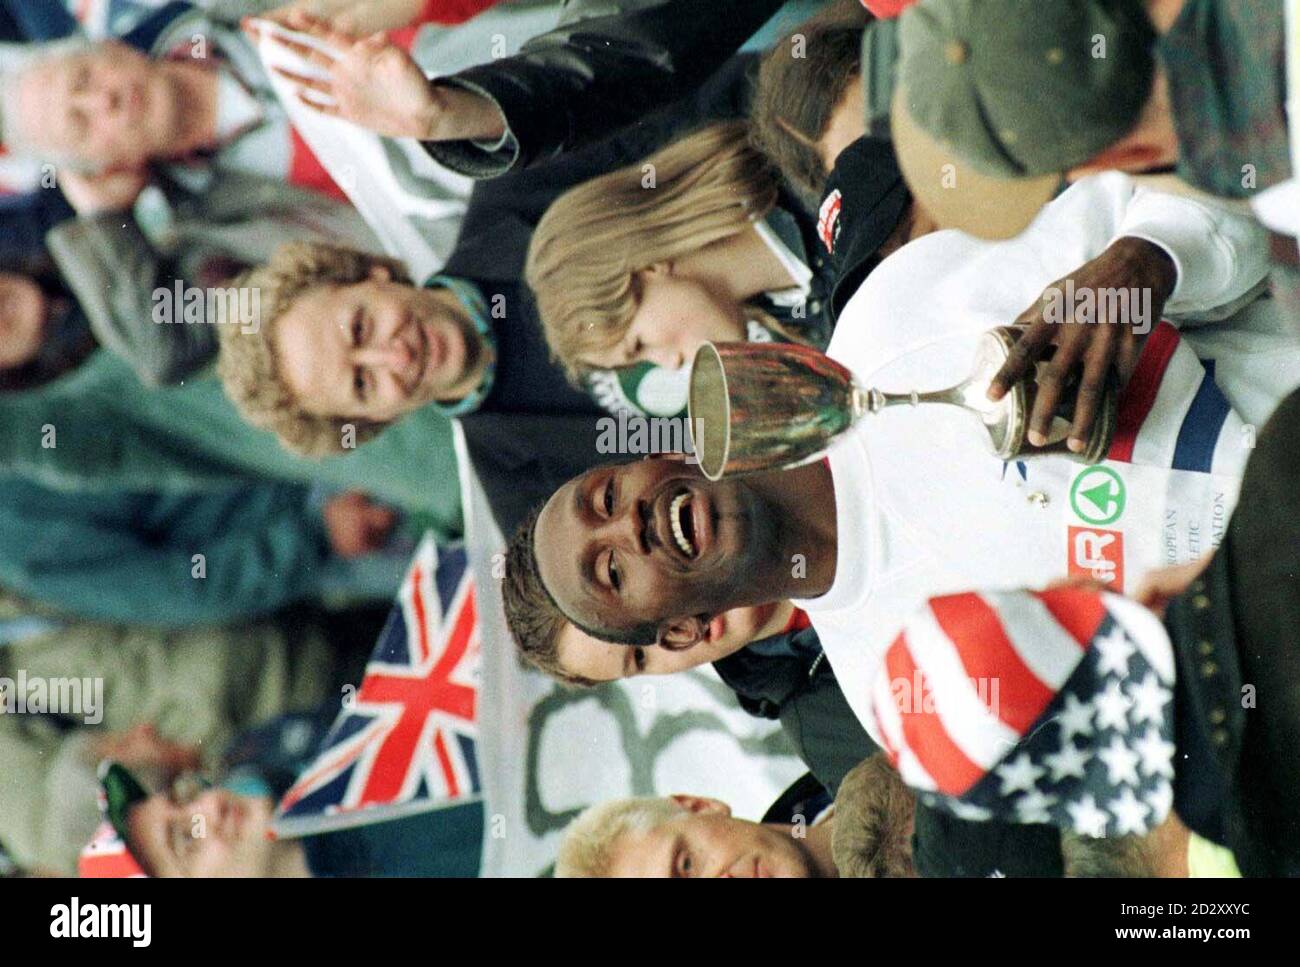 Linford Christie clutches the Men's European cup as he stands amongst the fans after the presentation ceremony at the Olympic Stadium in Munich today (Sunday). Christie retires from international competition after this meeting. Picture DAVID JONES/PA Stock Photo